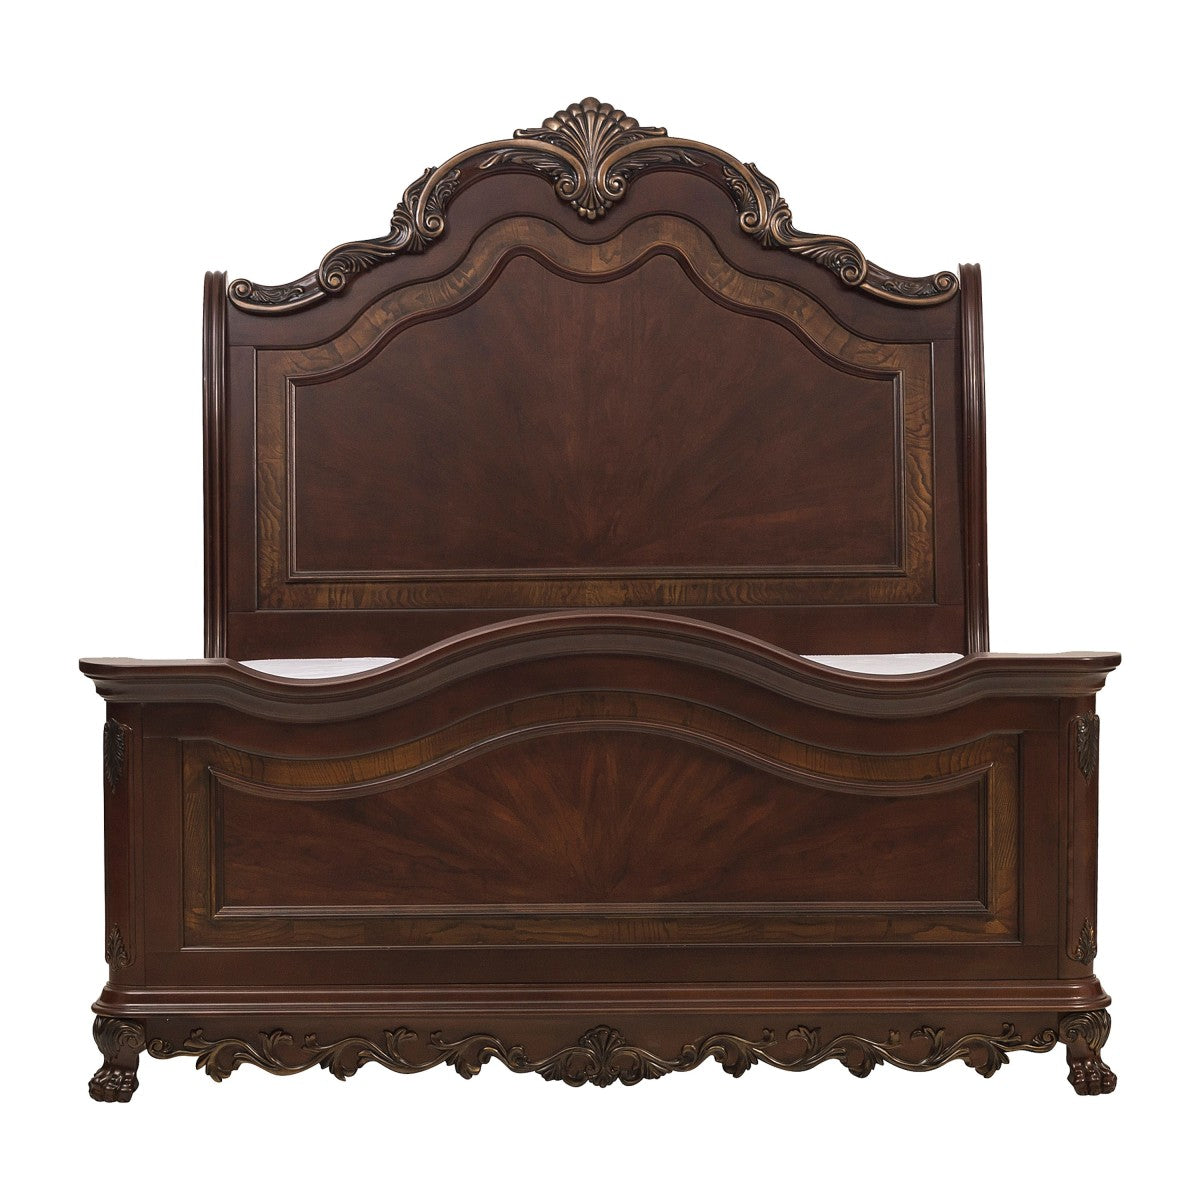 Deryn Park Cherry Traditional Cherry And Walnut Veneer Wood And Engineered Wood Queen Sleigh Bed